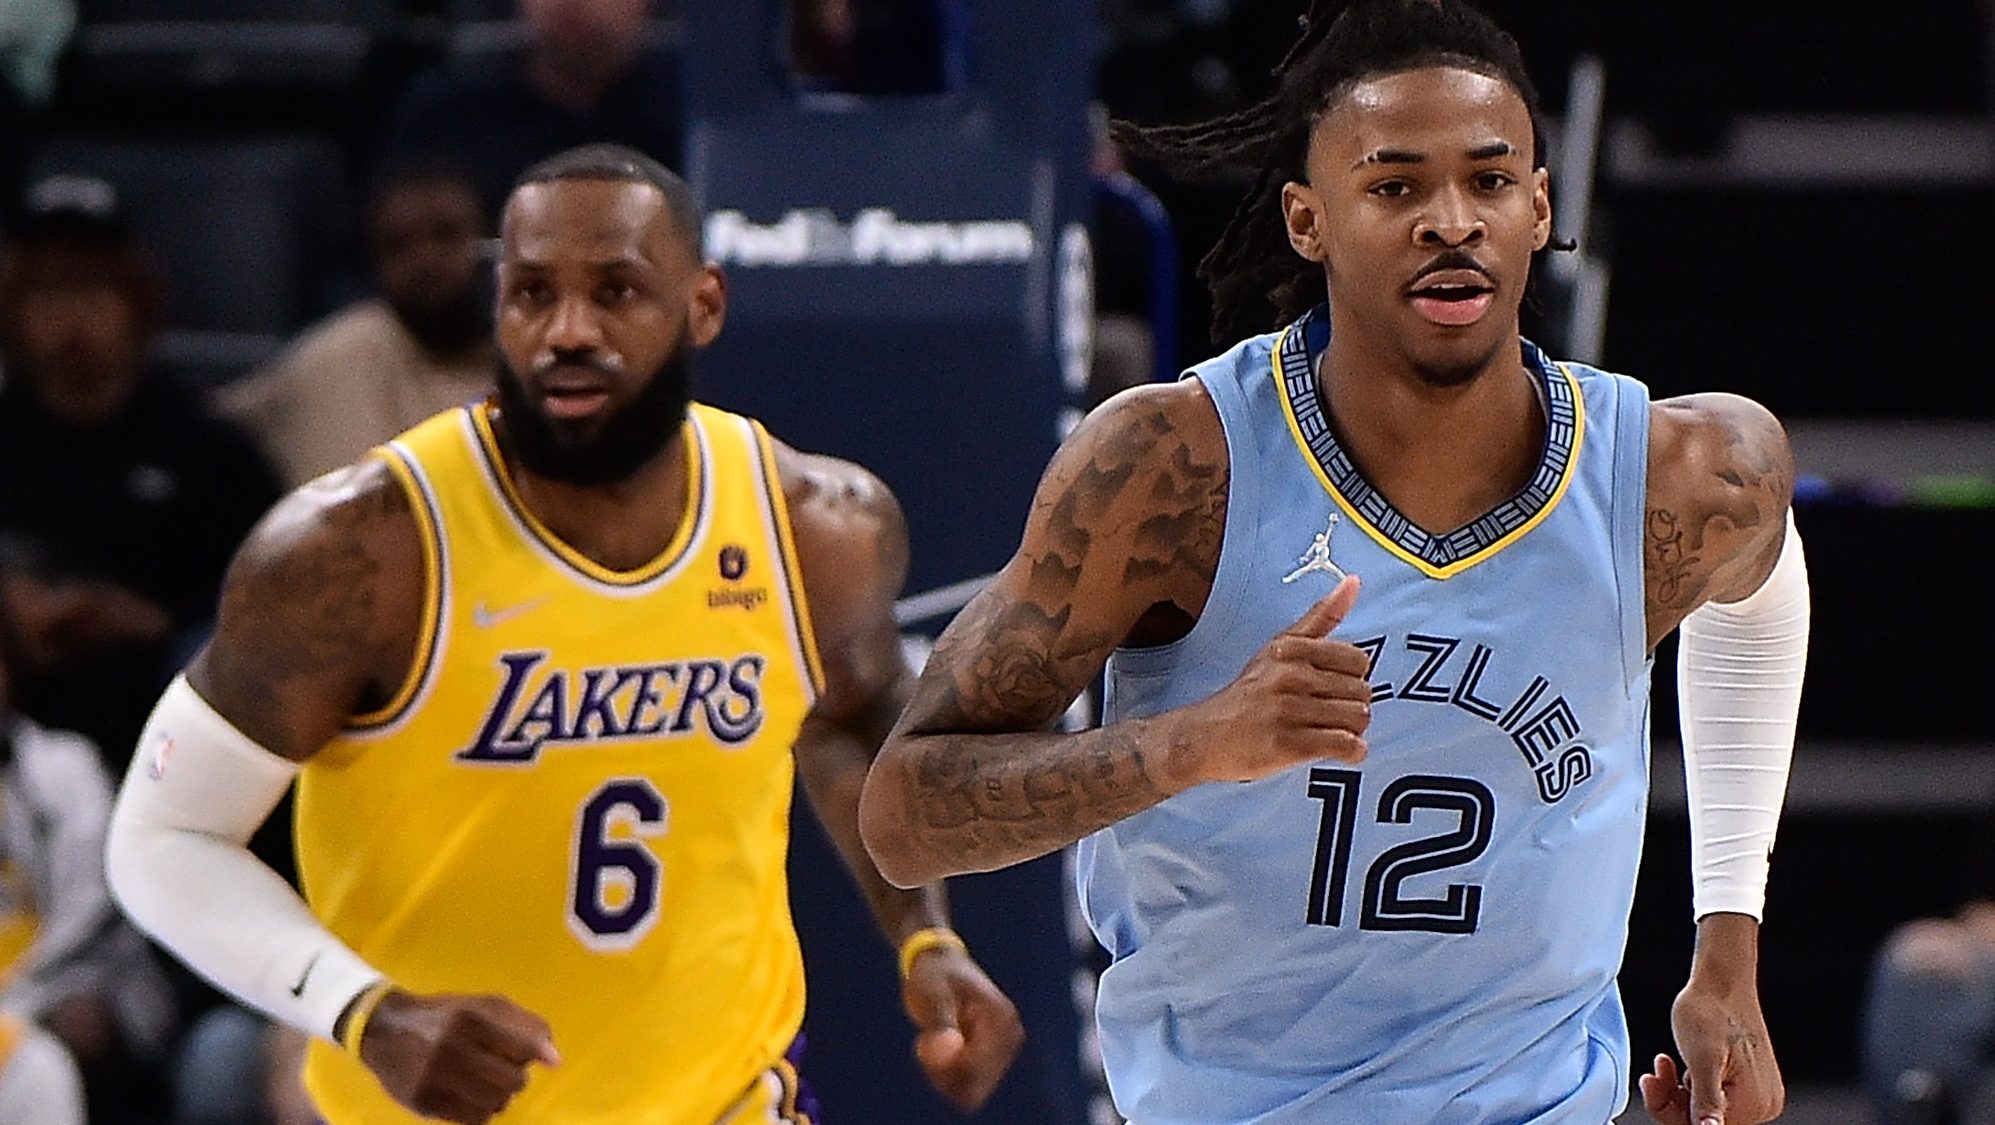 Lakers vs Grizzlies Game 1 Live Stream: How to Watch Free